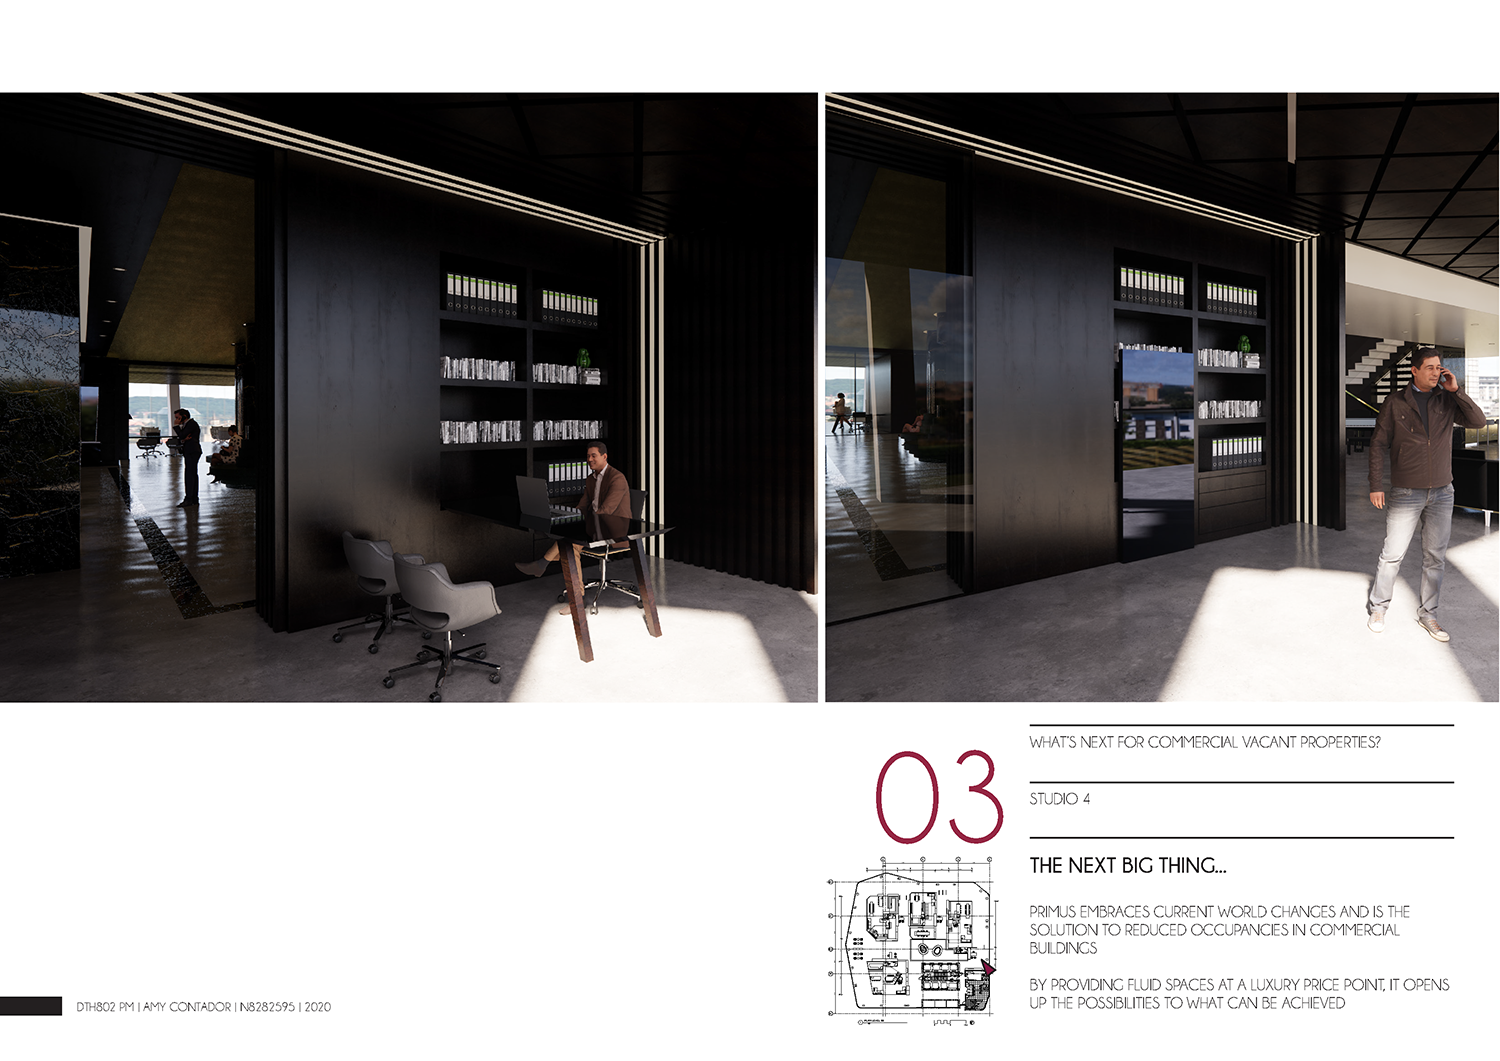 STUDIO FOUR TRANSFORMATION INTEGRATION BACK INTO LIVING SPACE

PRIMUS EMBRACES CURRENT WORLD CHANGES AND IS THE SOLUTION TO REDUCED OCCUPANCIES IN COMMERCIAL BUILDINGS

BY PROVIDING FLUID SPACES AT A LUXURY PRICE POINT, IT OPENS UP THE POSSIBILITIES TO WHAT CAN BE ACHIEVED